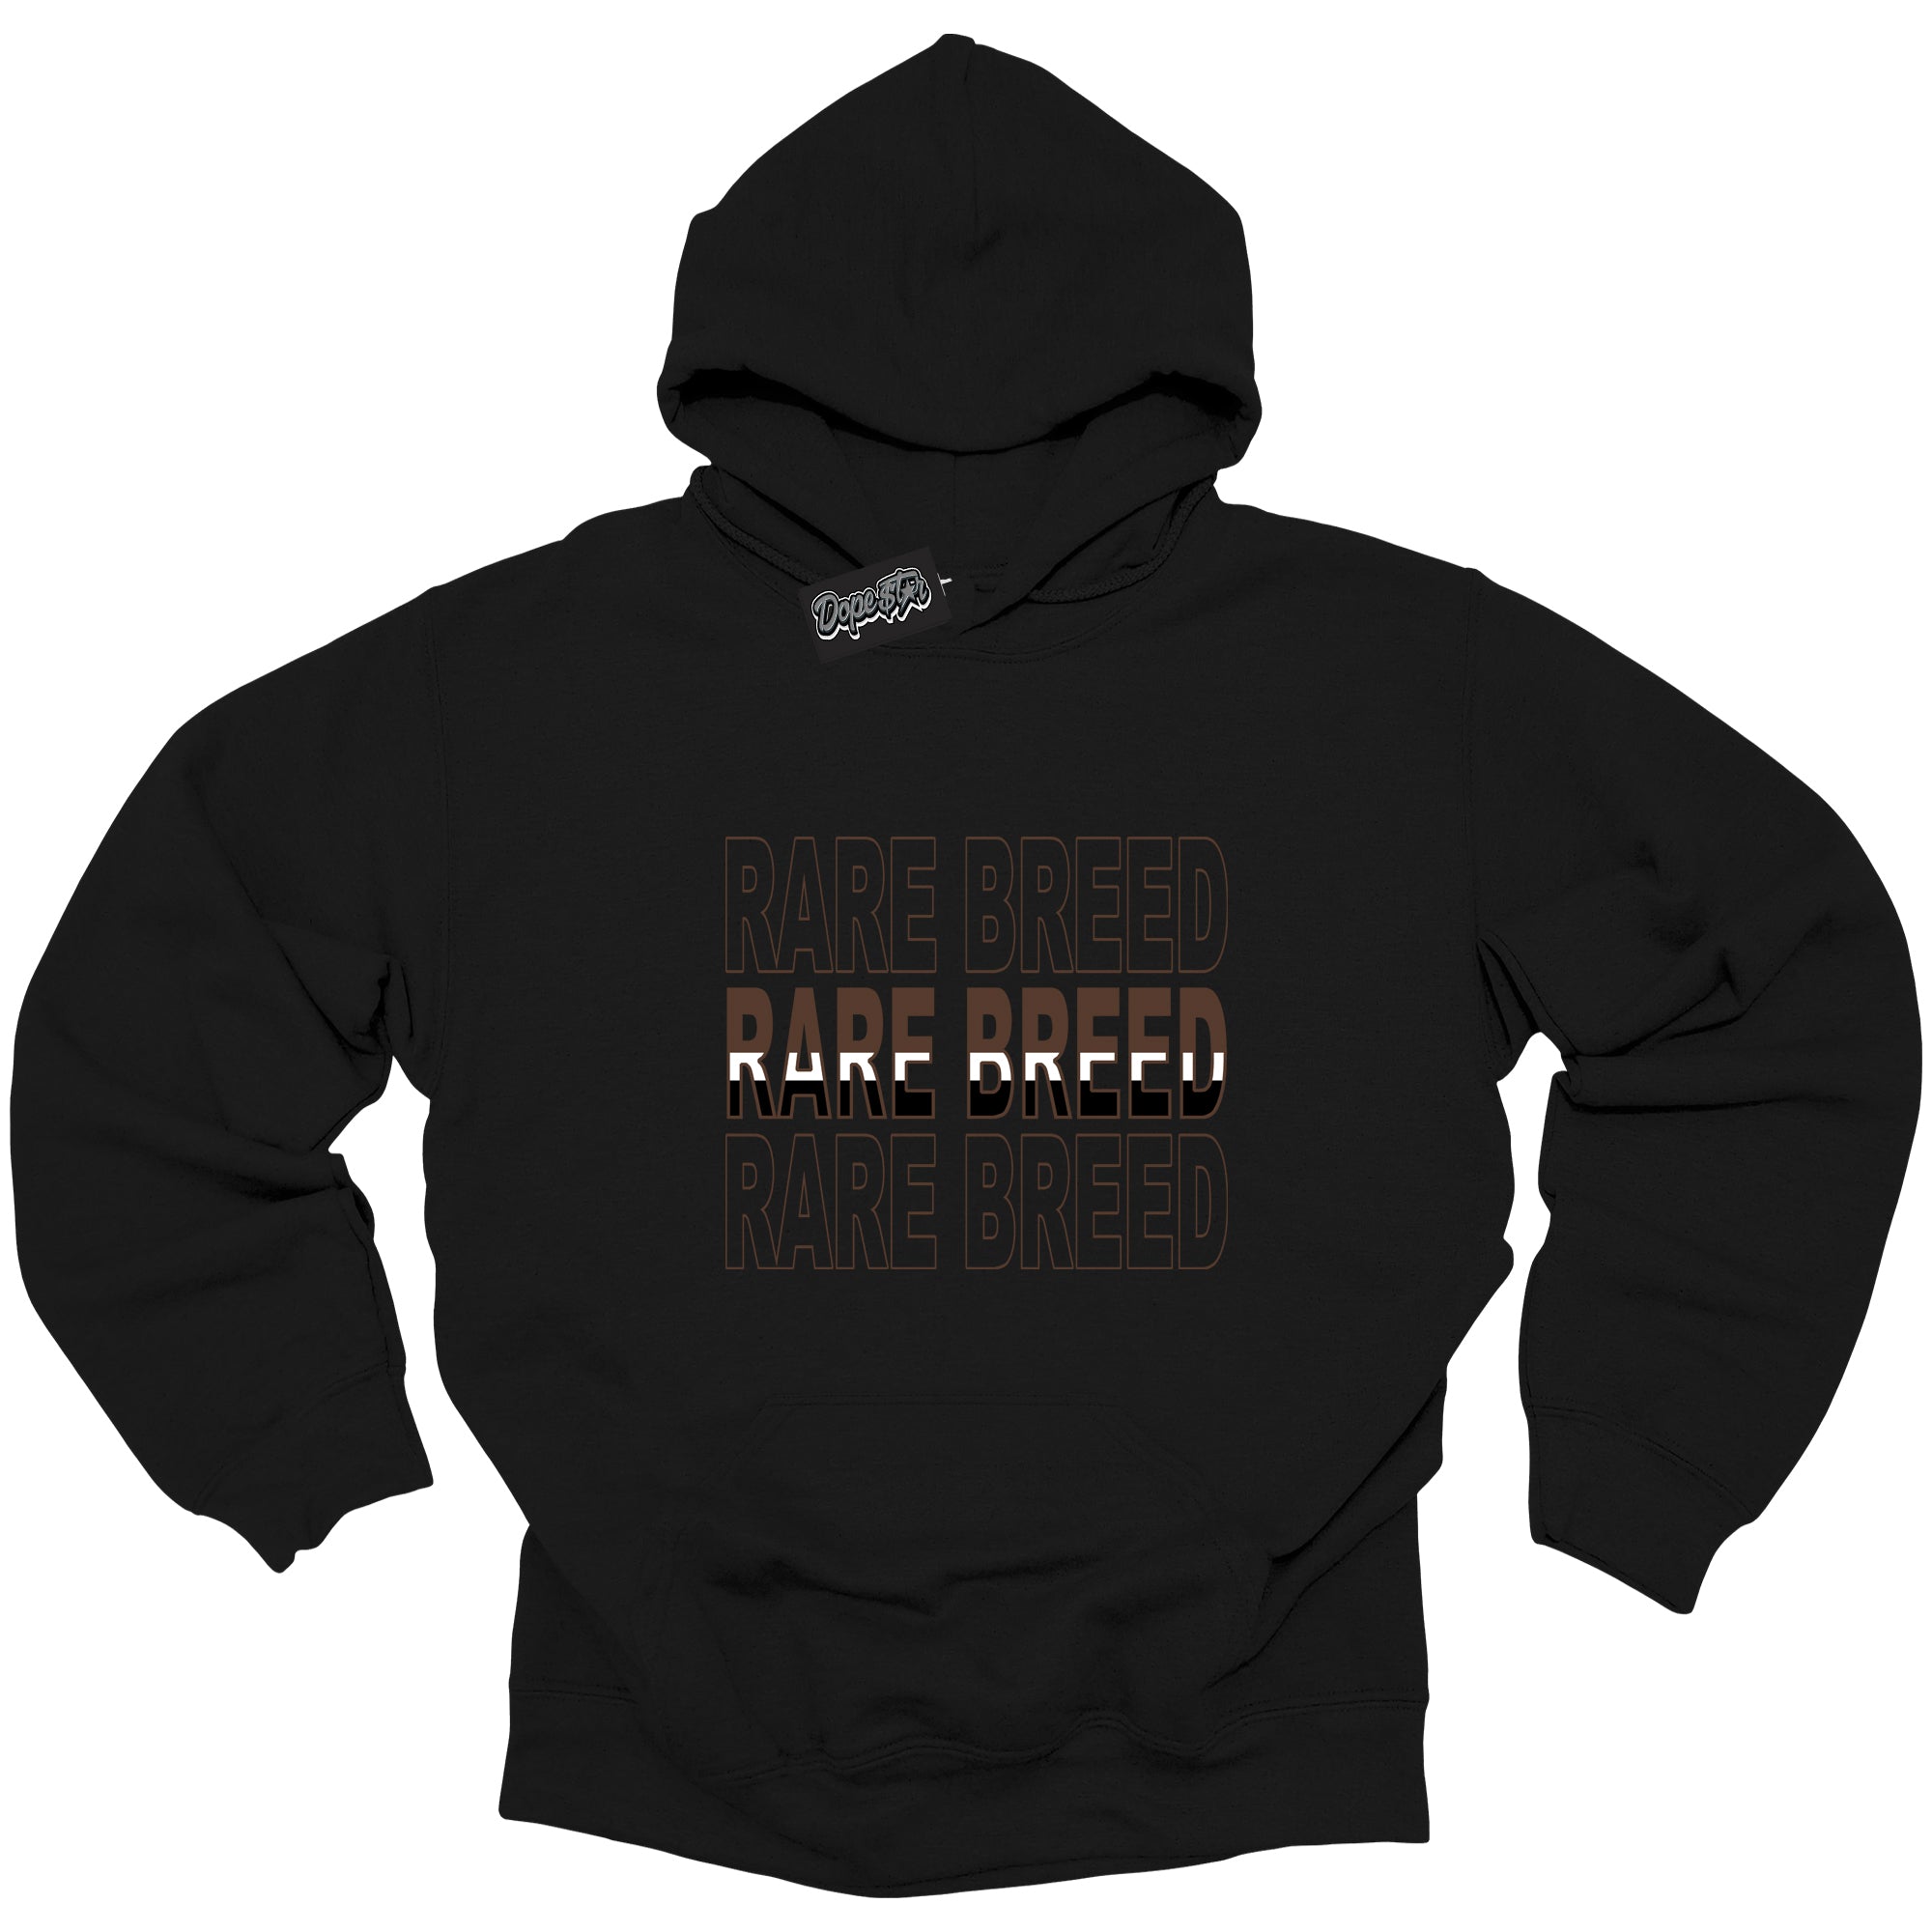 Cool Black Graphic DopeStar Hoodie with “ Rare Breed “ print, that perfectly matches Palomino 1s sneakers